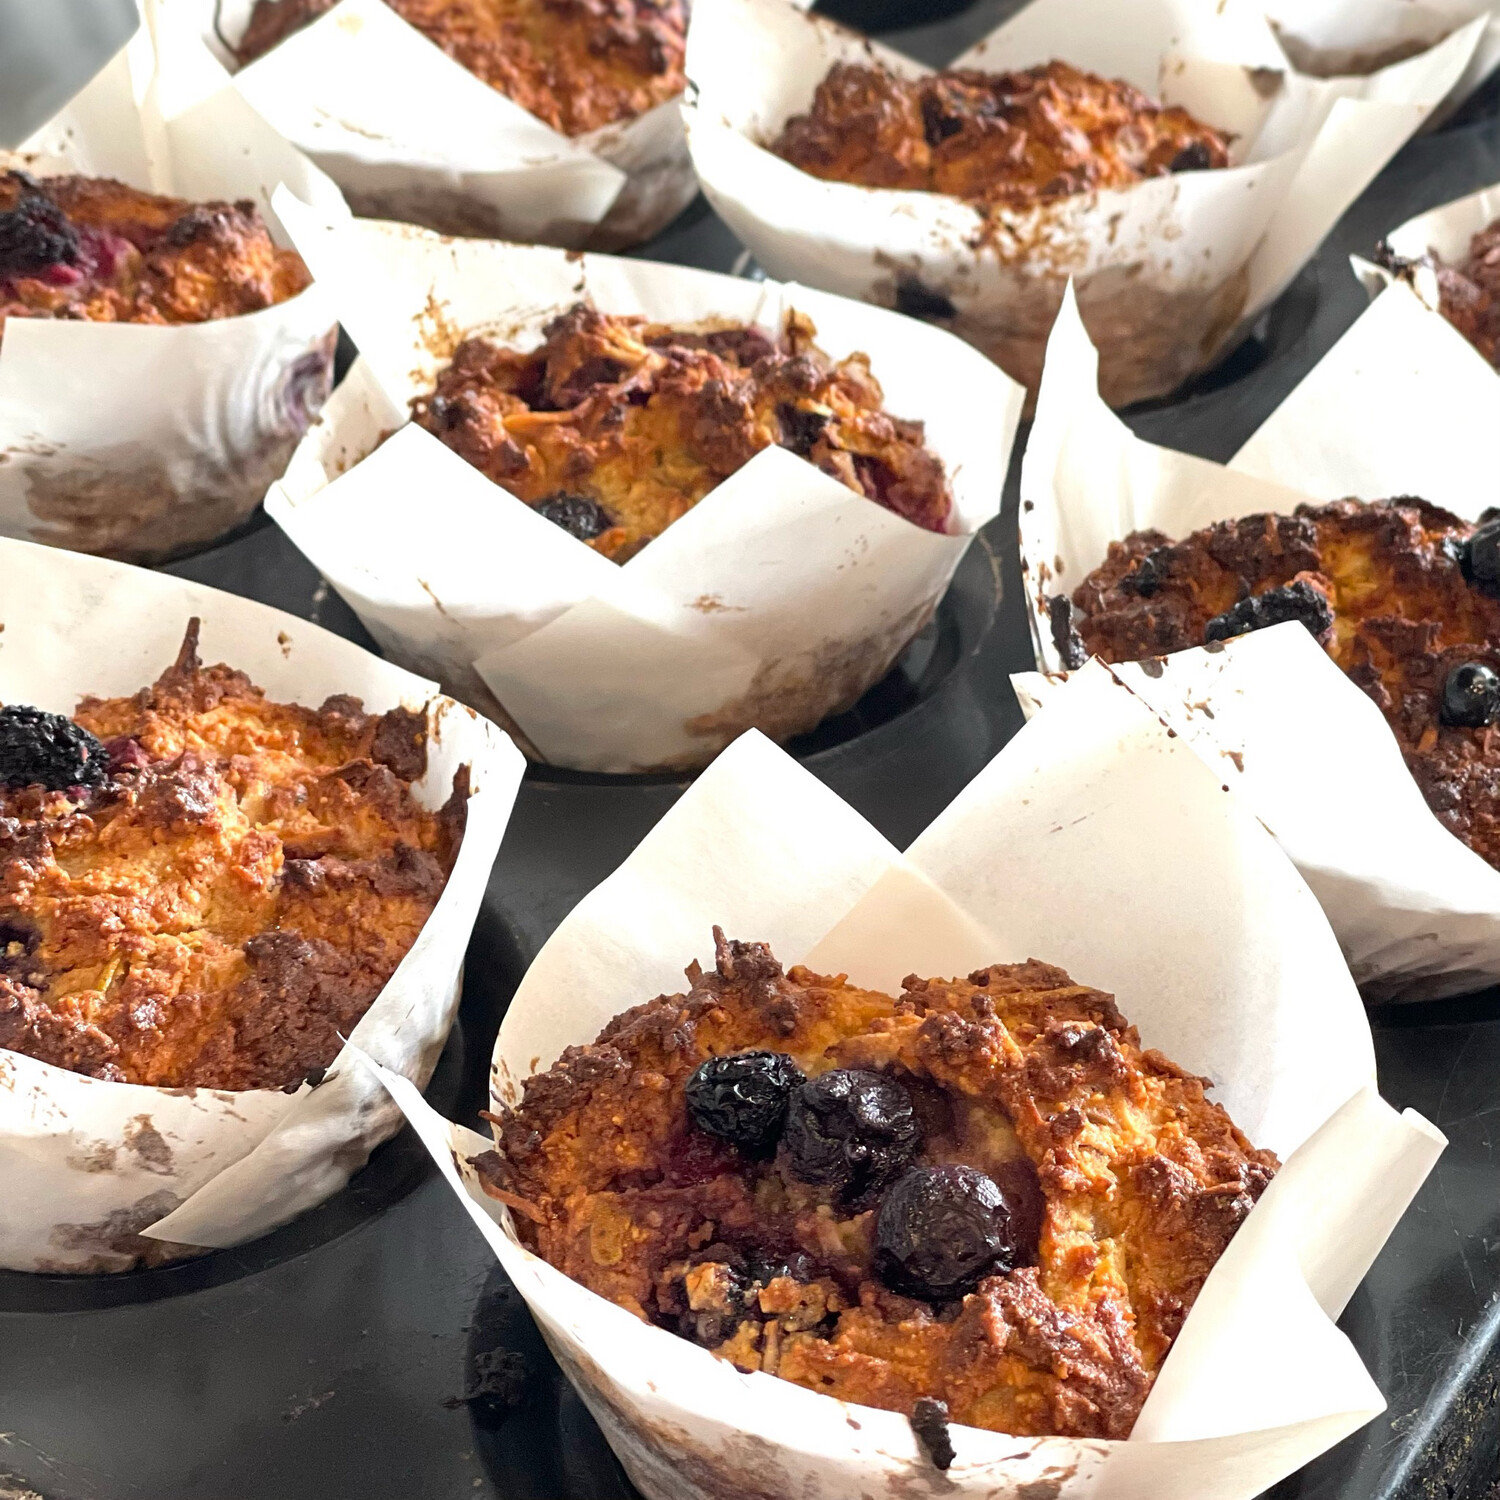 Gluten-Free Dairy Free Muffins Made with Almond Meal, Fresh Berries, Coconut and Pear. (4pkt)